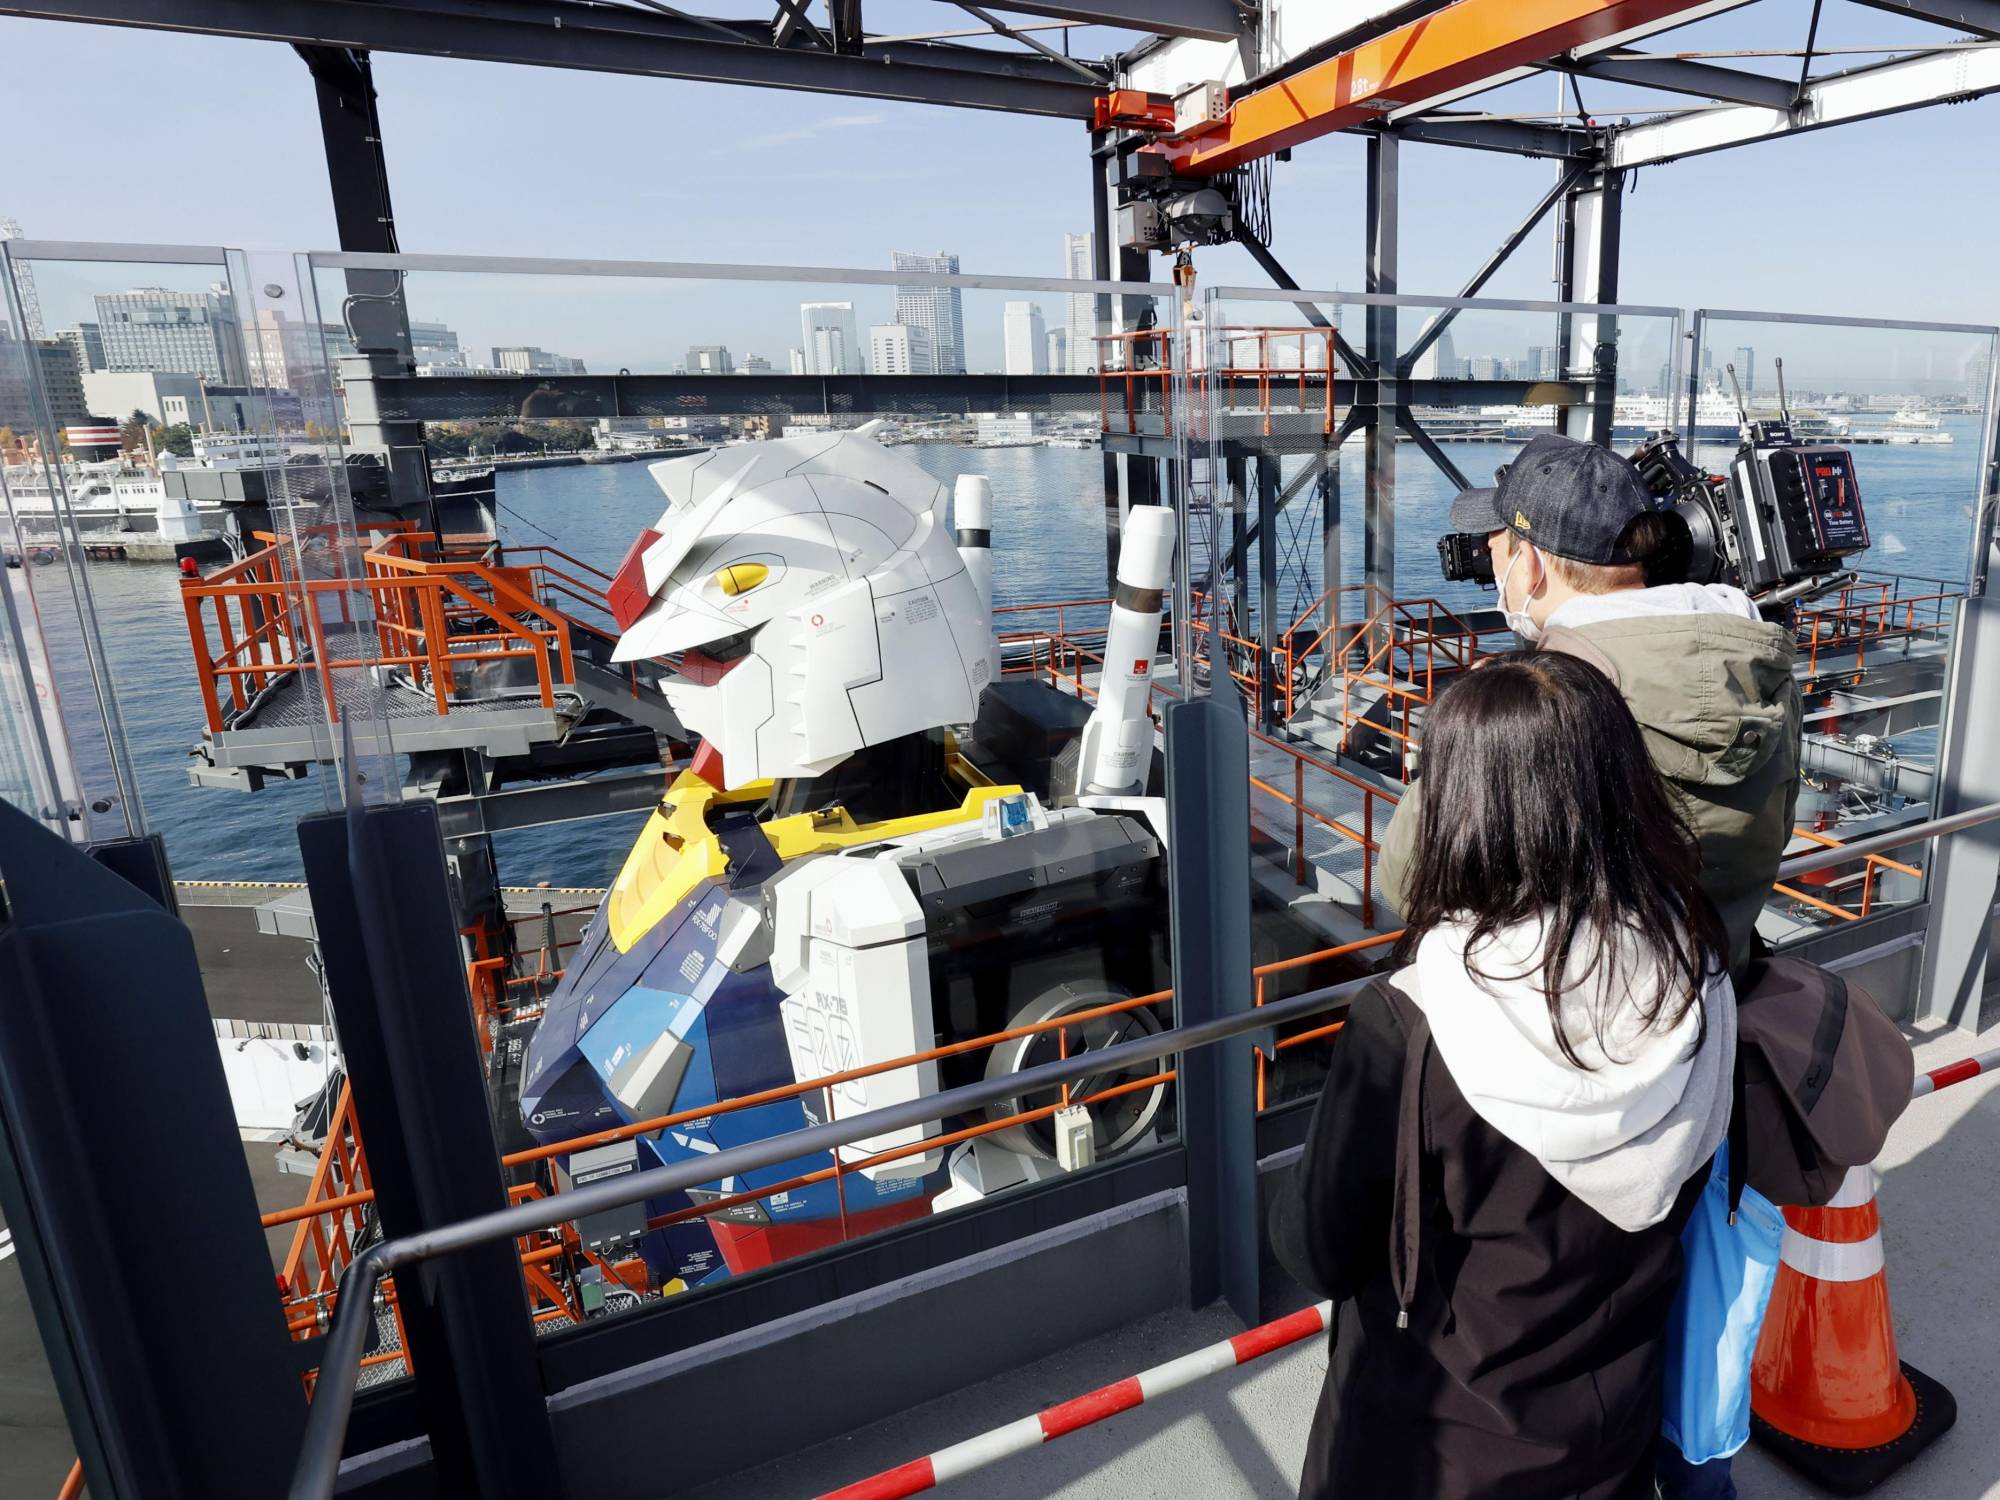 Reporters look at the side of a life-size statue of Gundam set up at Yokohama Pier on Monday. | KYODO